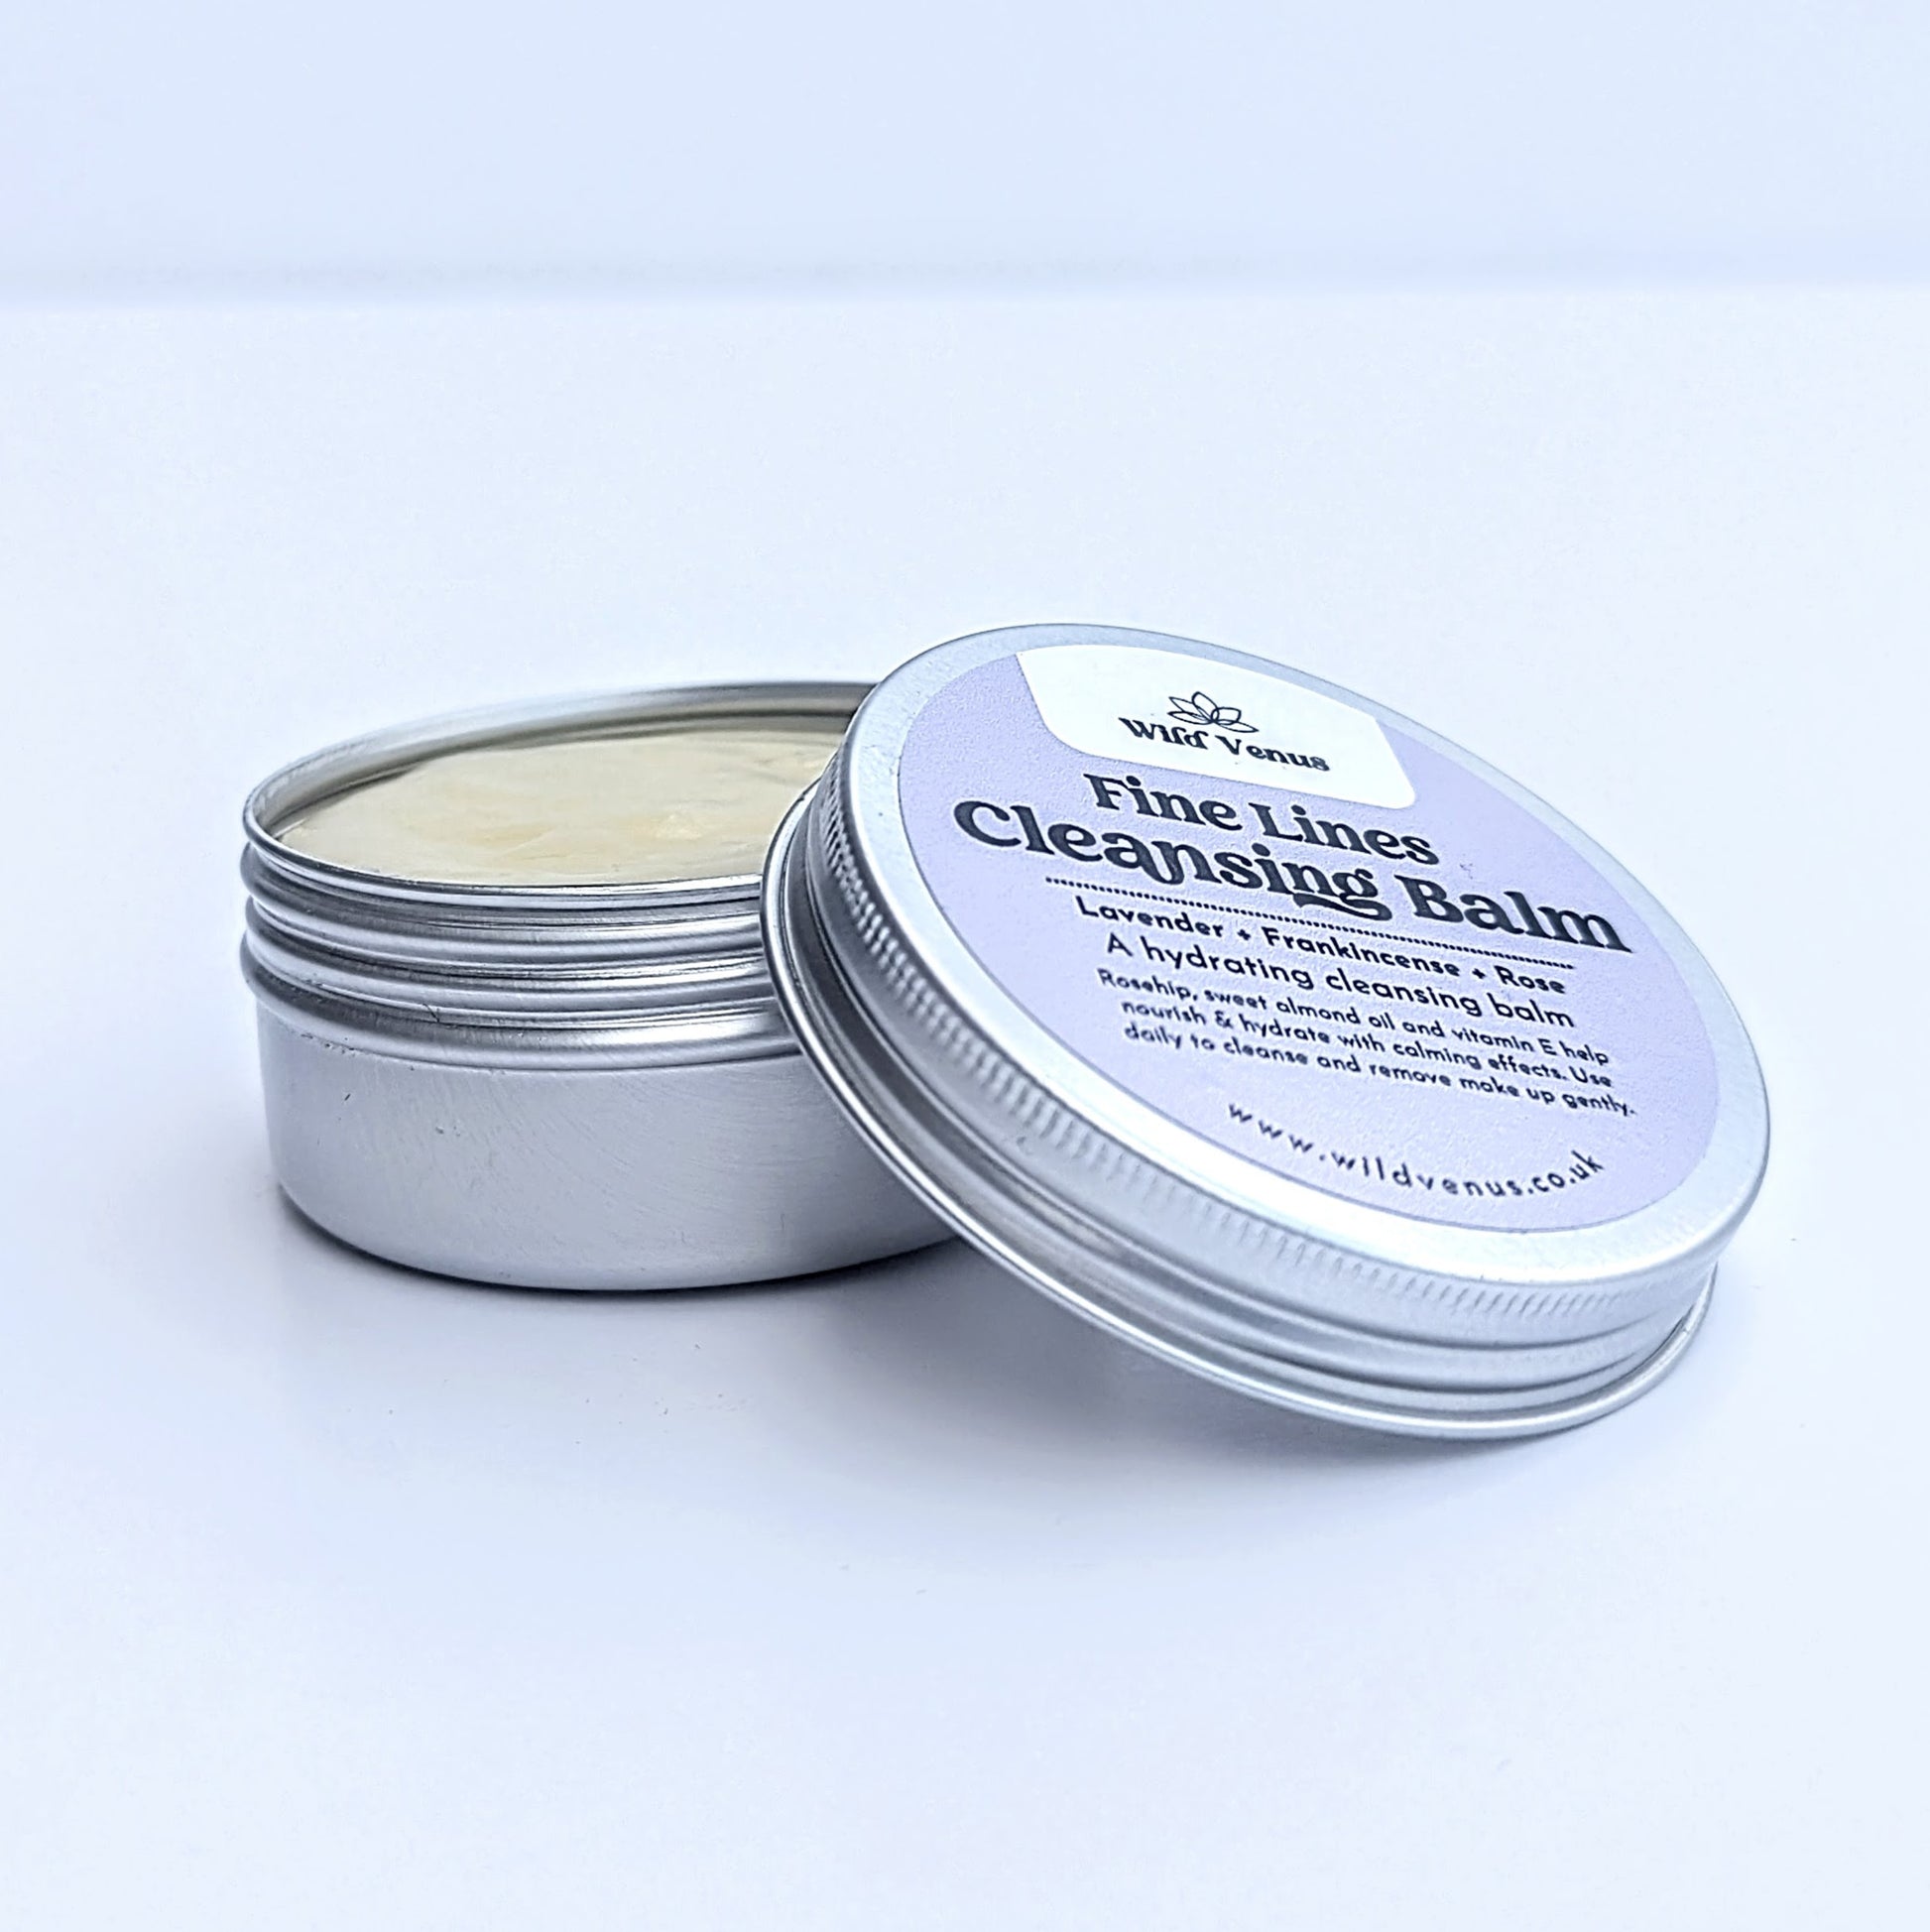 A tin of Fine Lines Cleansing Balm. The tin is open and the lid is resting against the side of the open tin. The product is shot against a plain white background. 